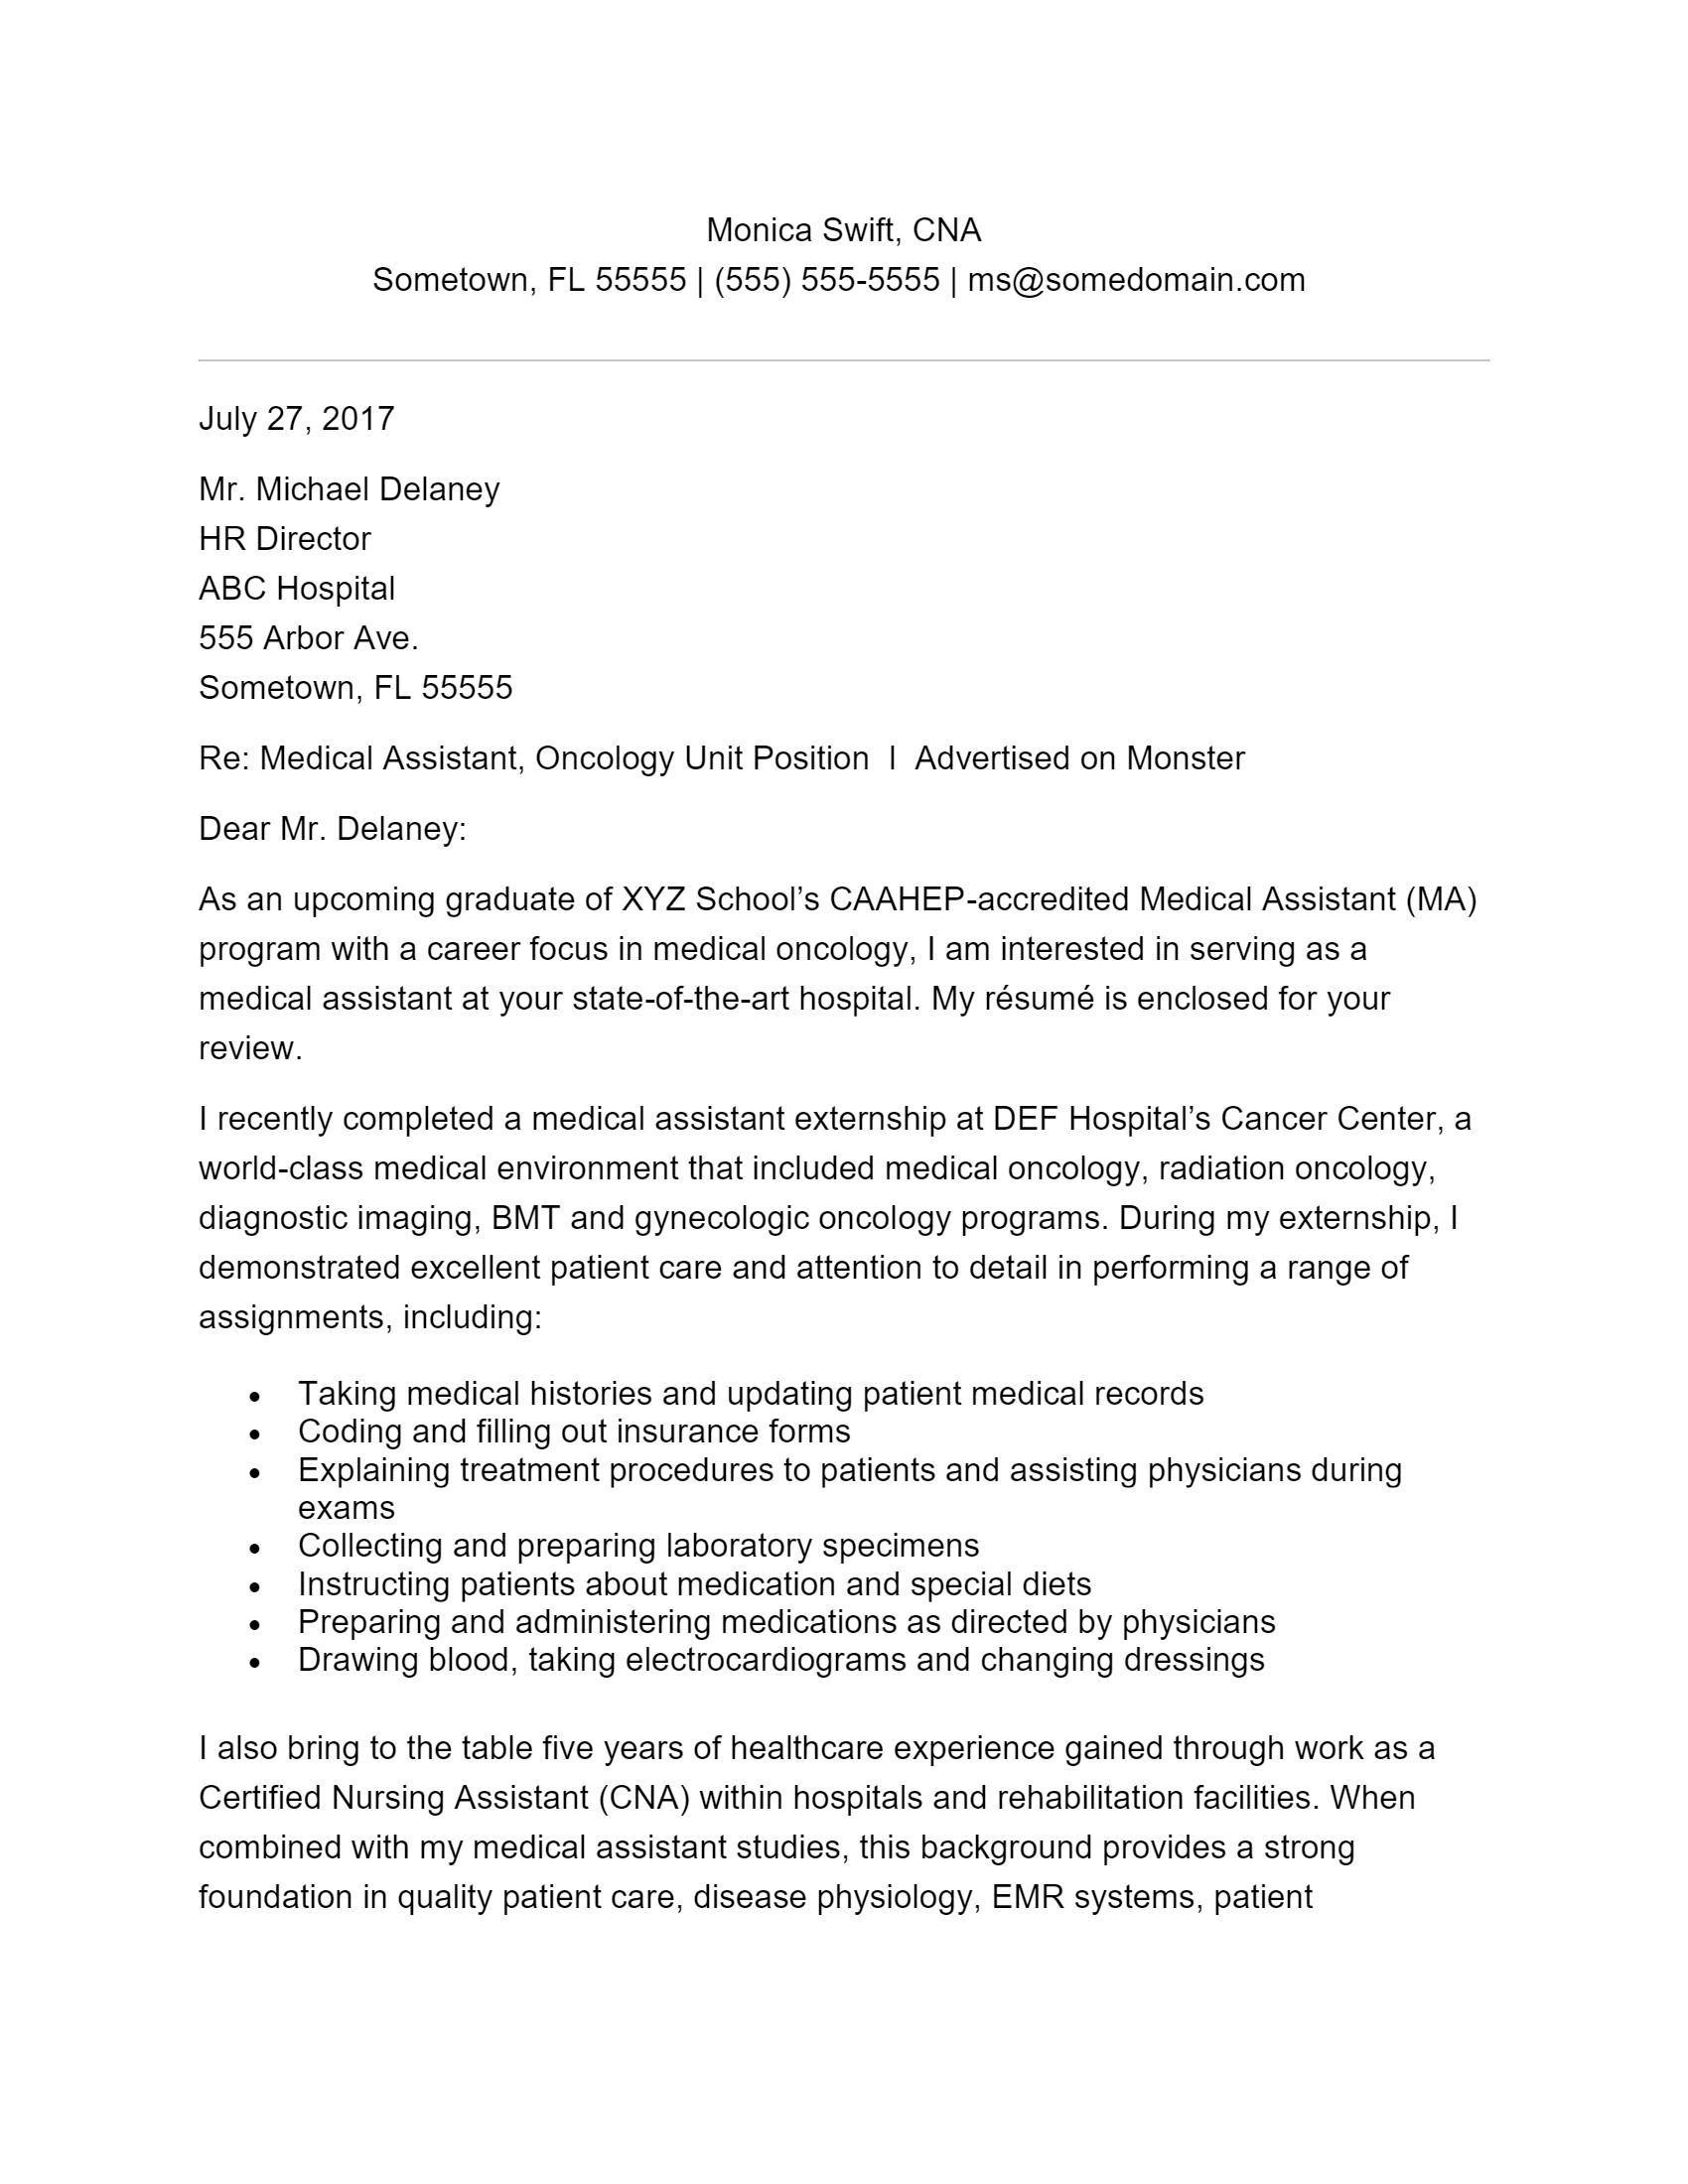 short cover letter examples medical assistant